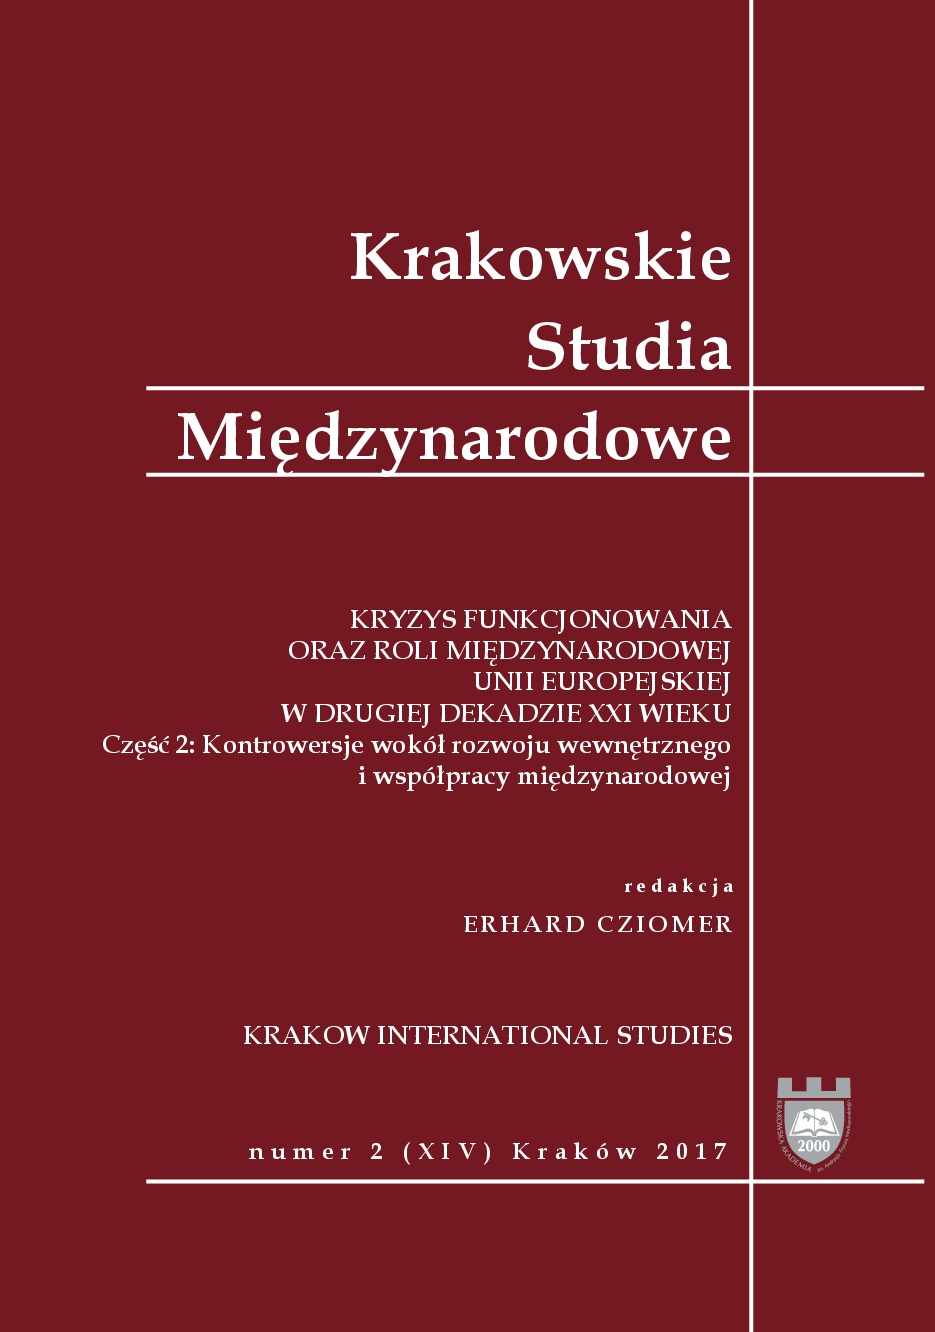 Polish political elites in relation to relations with Germany within the European Union, ed. Krzysztof Malinowski [Publisher of the West Institute, Poznań 2017, 342 pp.] Cover Image